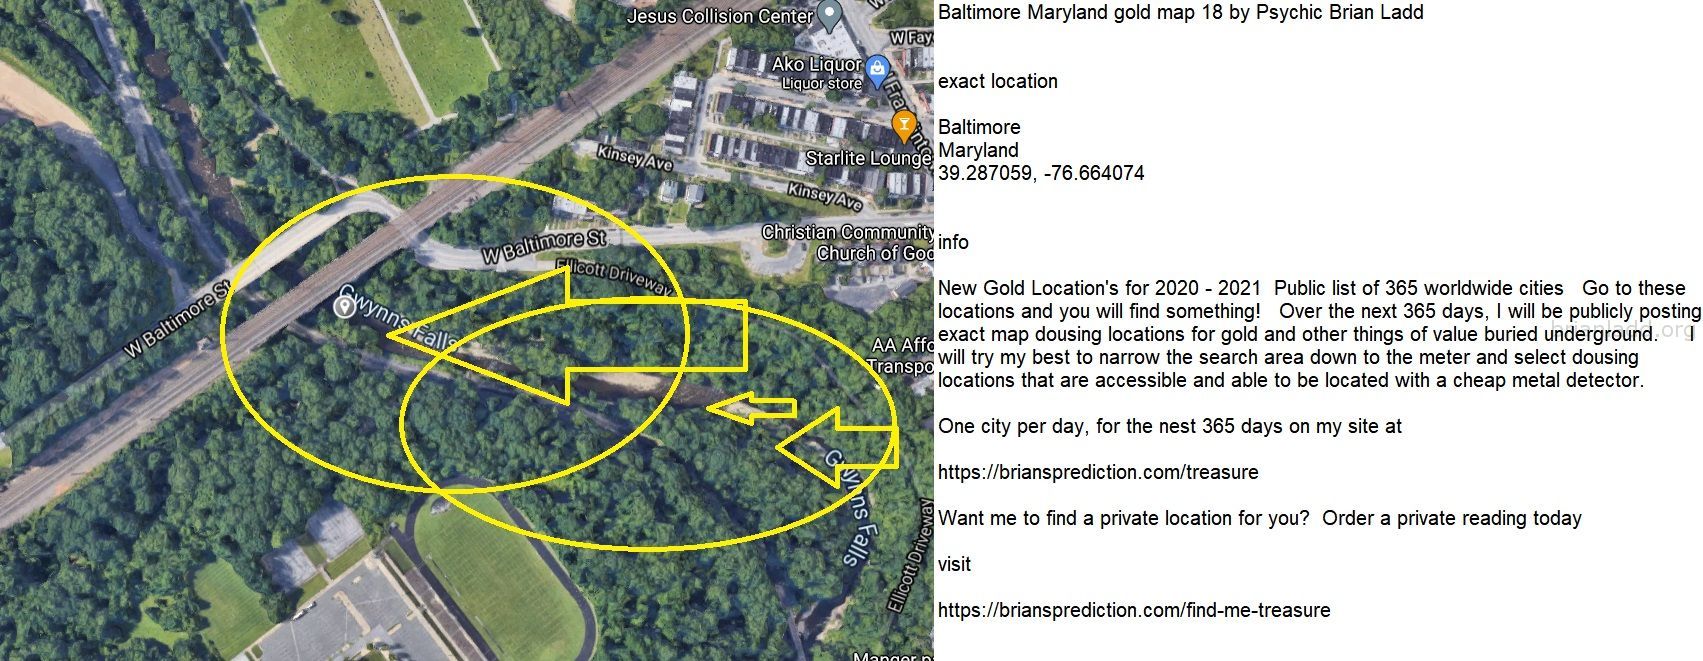 Baltimore Maryland gold map 19 by Psychic Brian Ladd
New Gold Location's for 2020 - 2021  Public list of 365 worldwide cities   Go to these locations and you will find something!   Over the next 365 days, I will be publicly posting exact map dousing locations for gold and other things of value buried underground.     I will try my best to narrow the search area down to the meter and select dousing locations that are accessible and able to be located with a cheap metal detector. One city per day, for the nest 365 days on my site at:  https://briansprediction.com/treasure  Want me to find a private location for you for anything?  Order a private reading today at:  https://briansprediction.com/find-me-treasure
